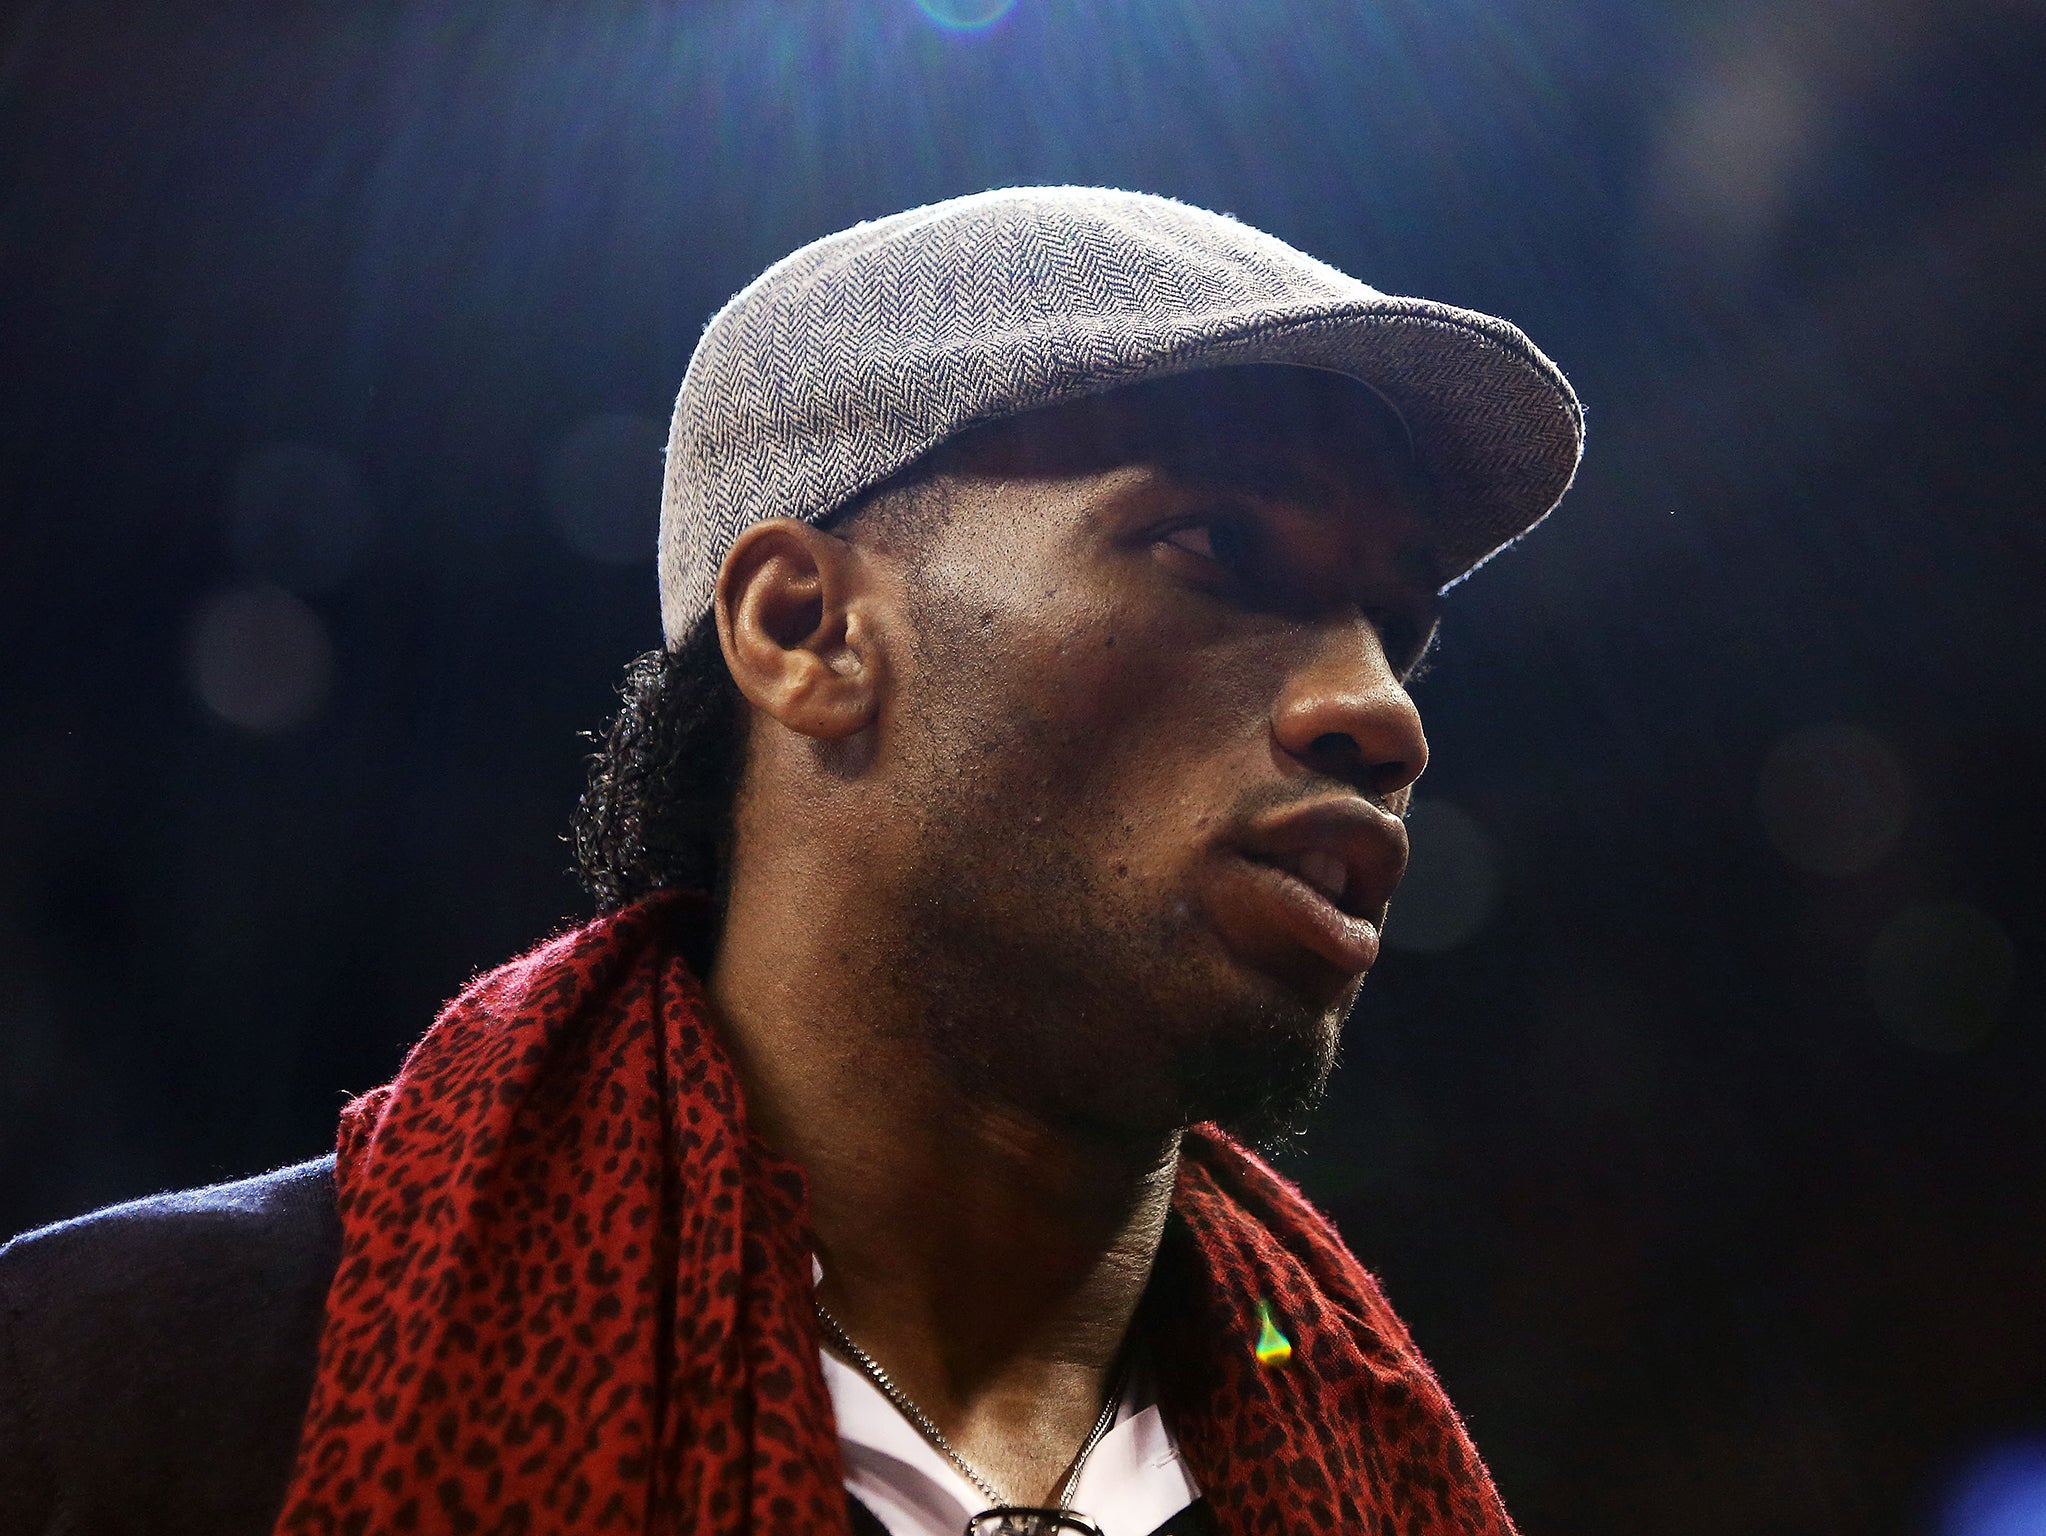 Drogba signed up as a Champion for Peace this year